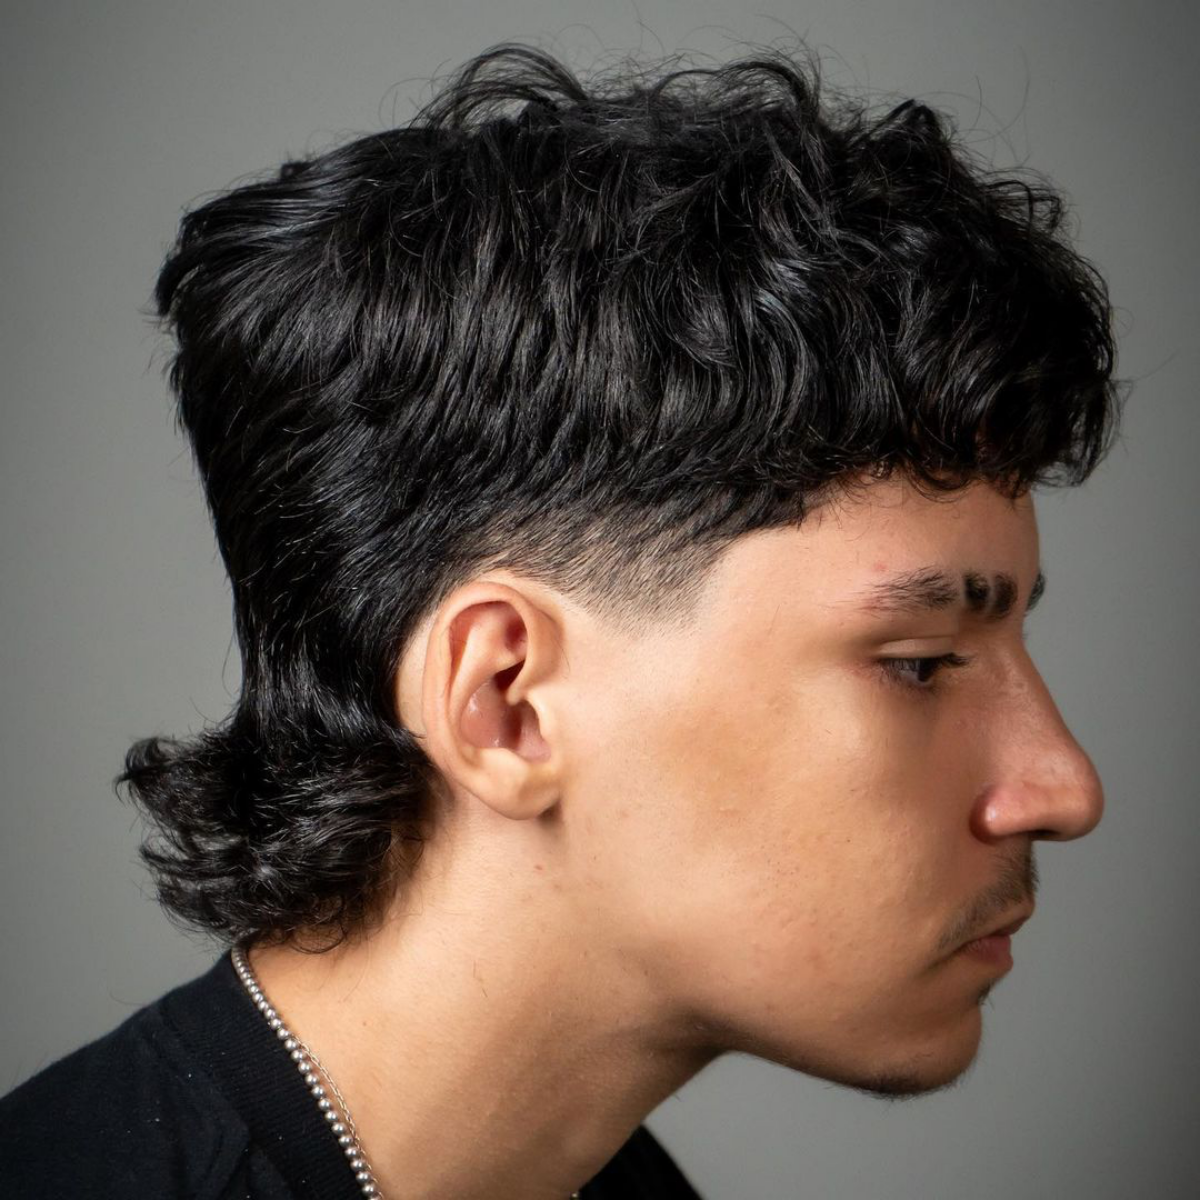 classy mullet hairstyle for men